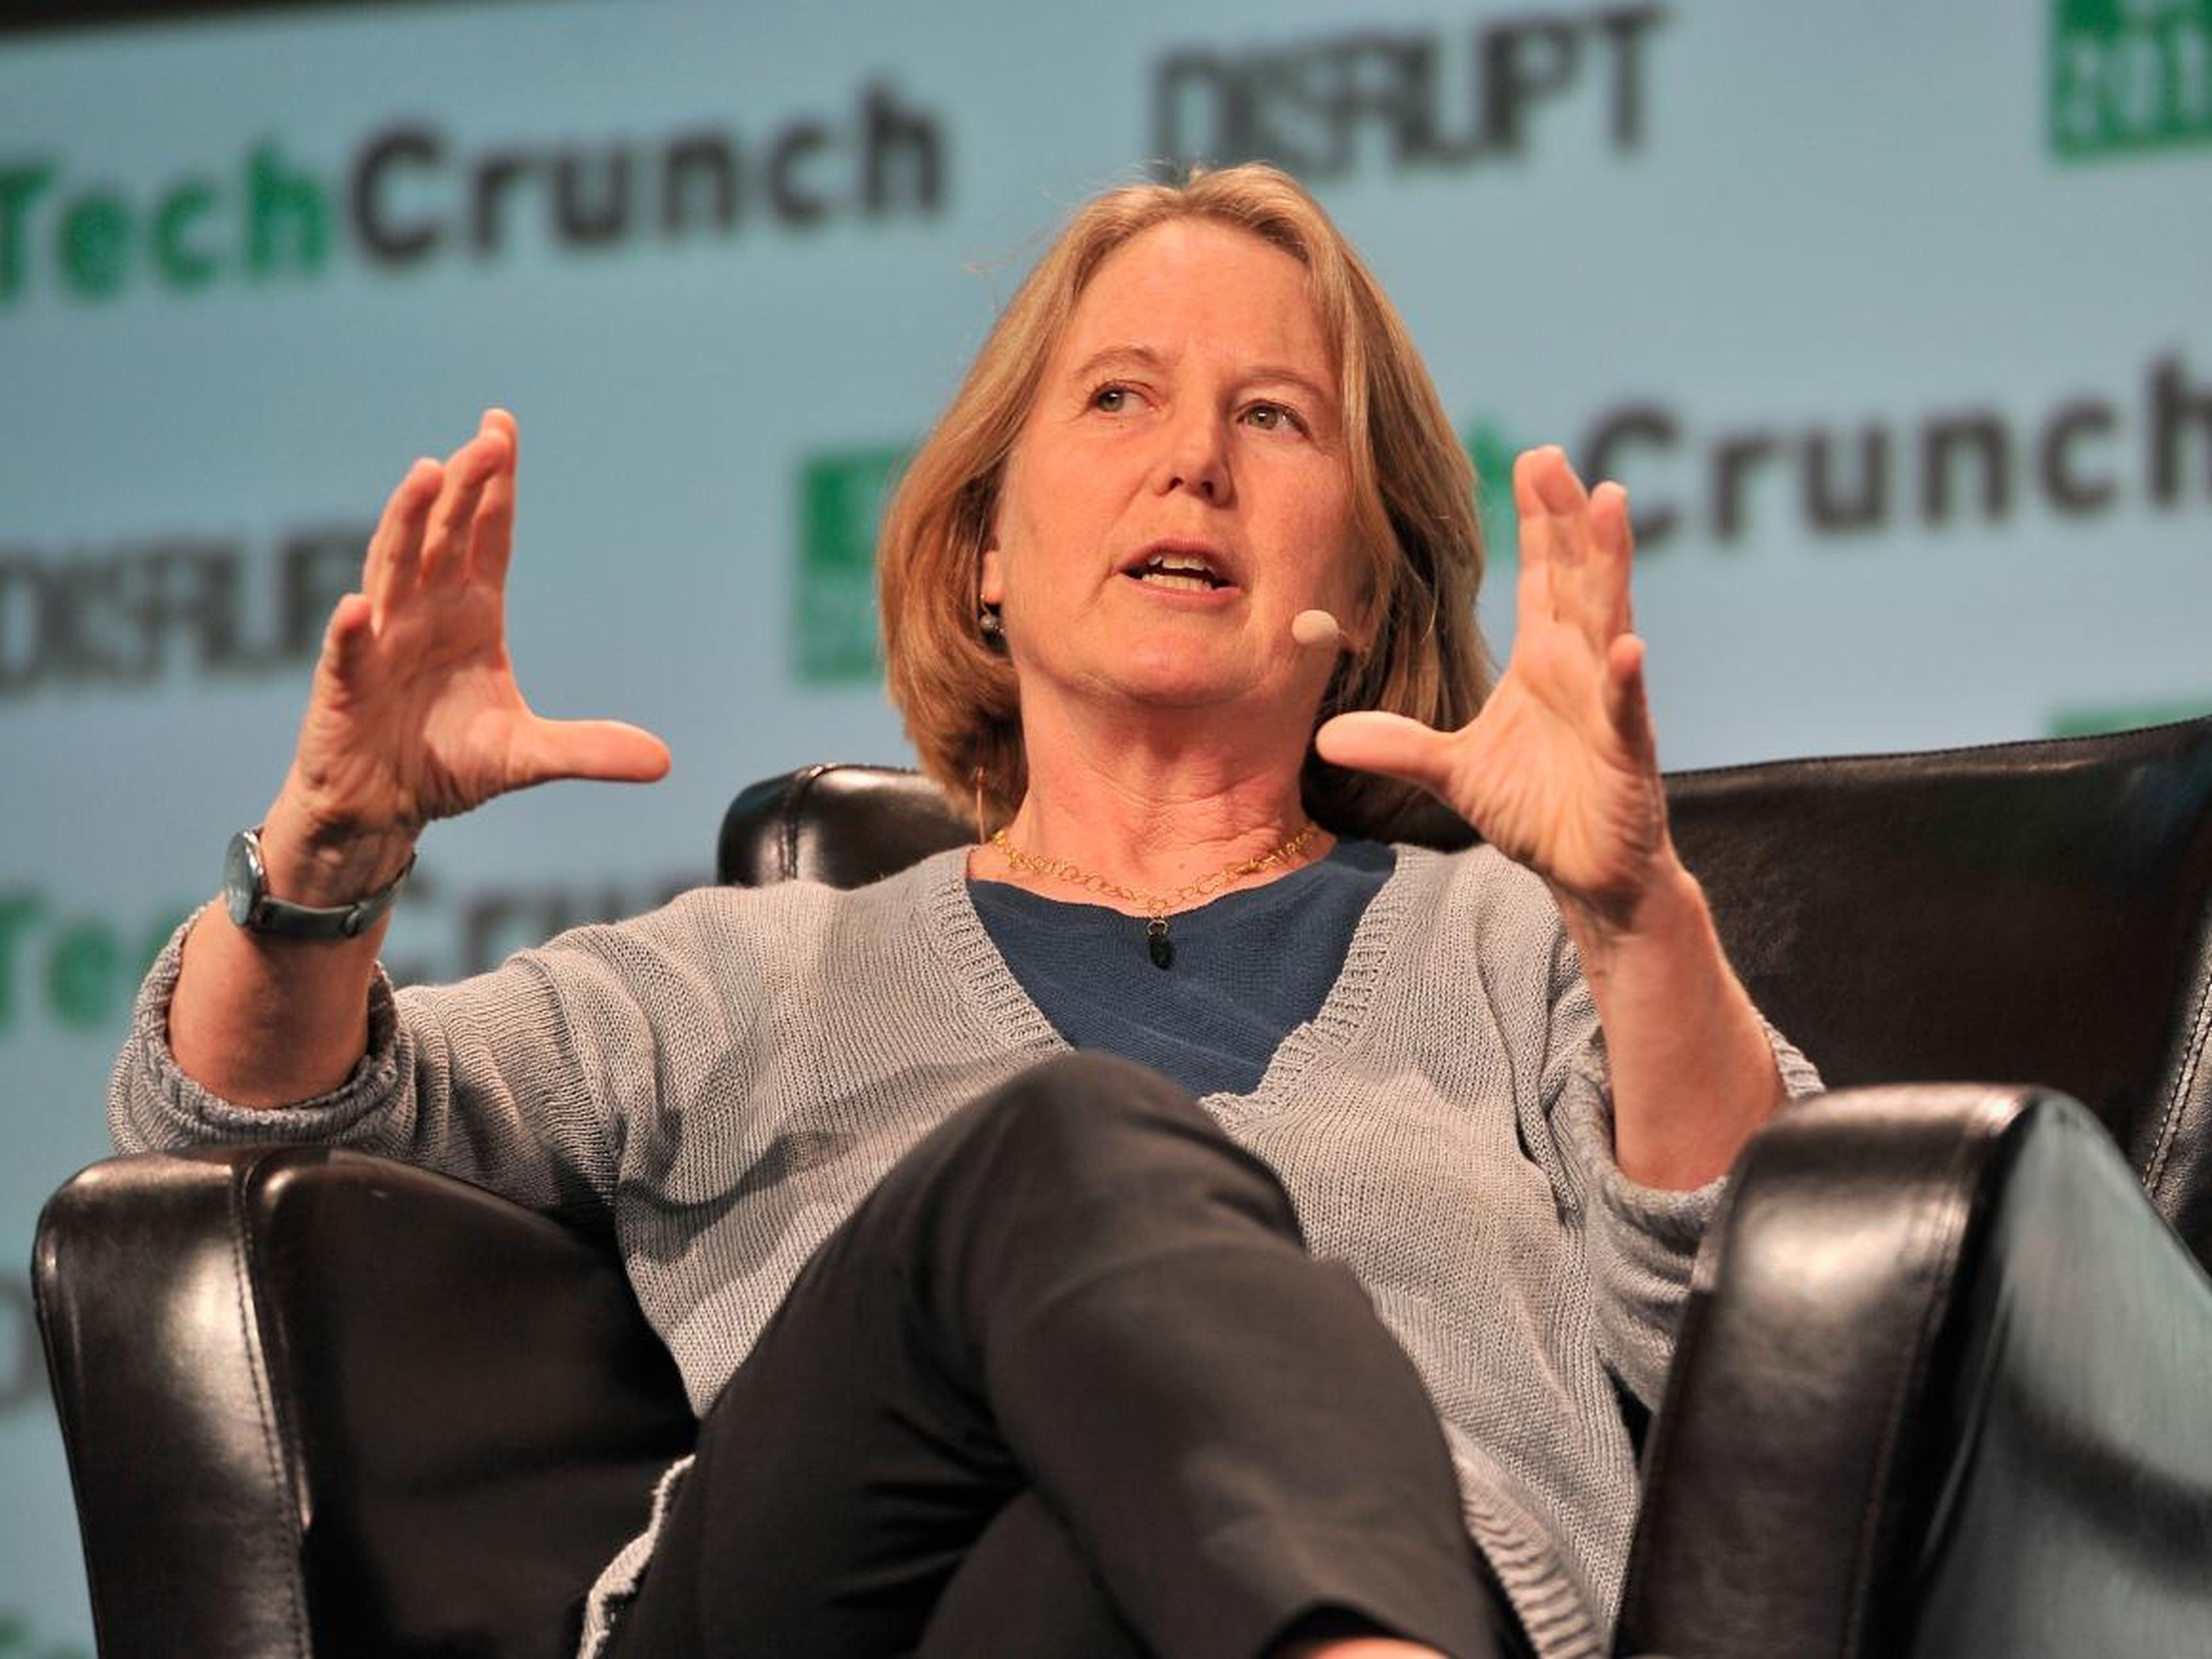 Diane Greene — who Google hired in 2015 — runs Google's cloud businesses, which includes G Suite (formerly Google Apps for Work), Google Cloud Platform, and more.